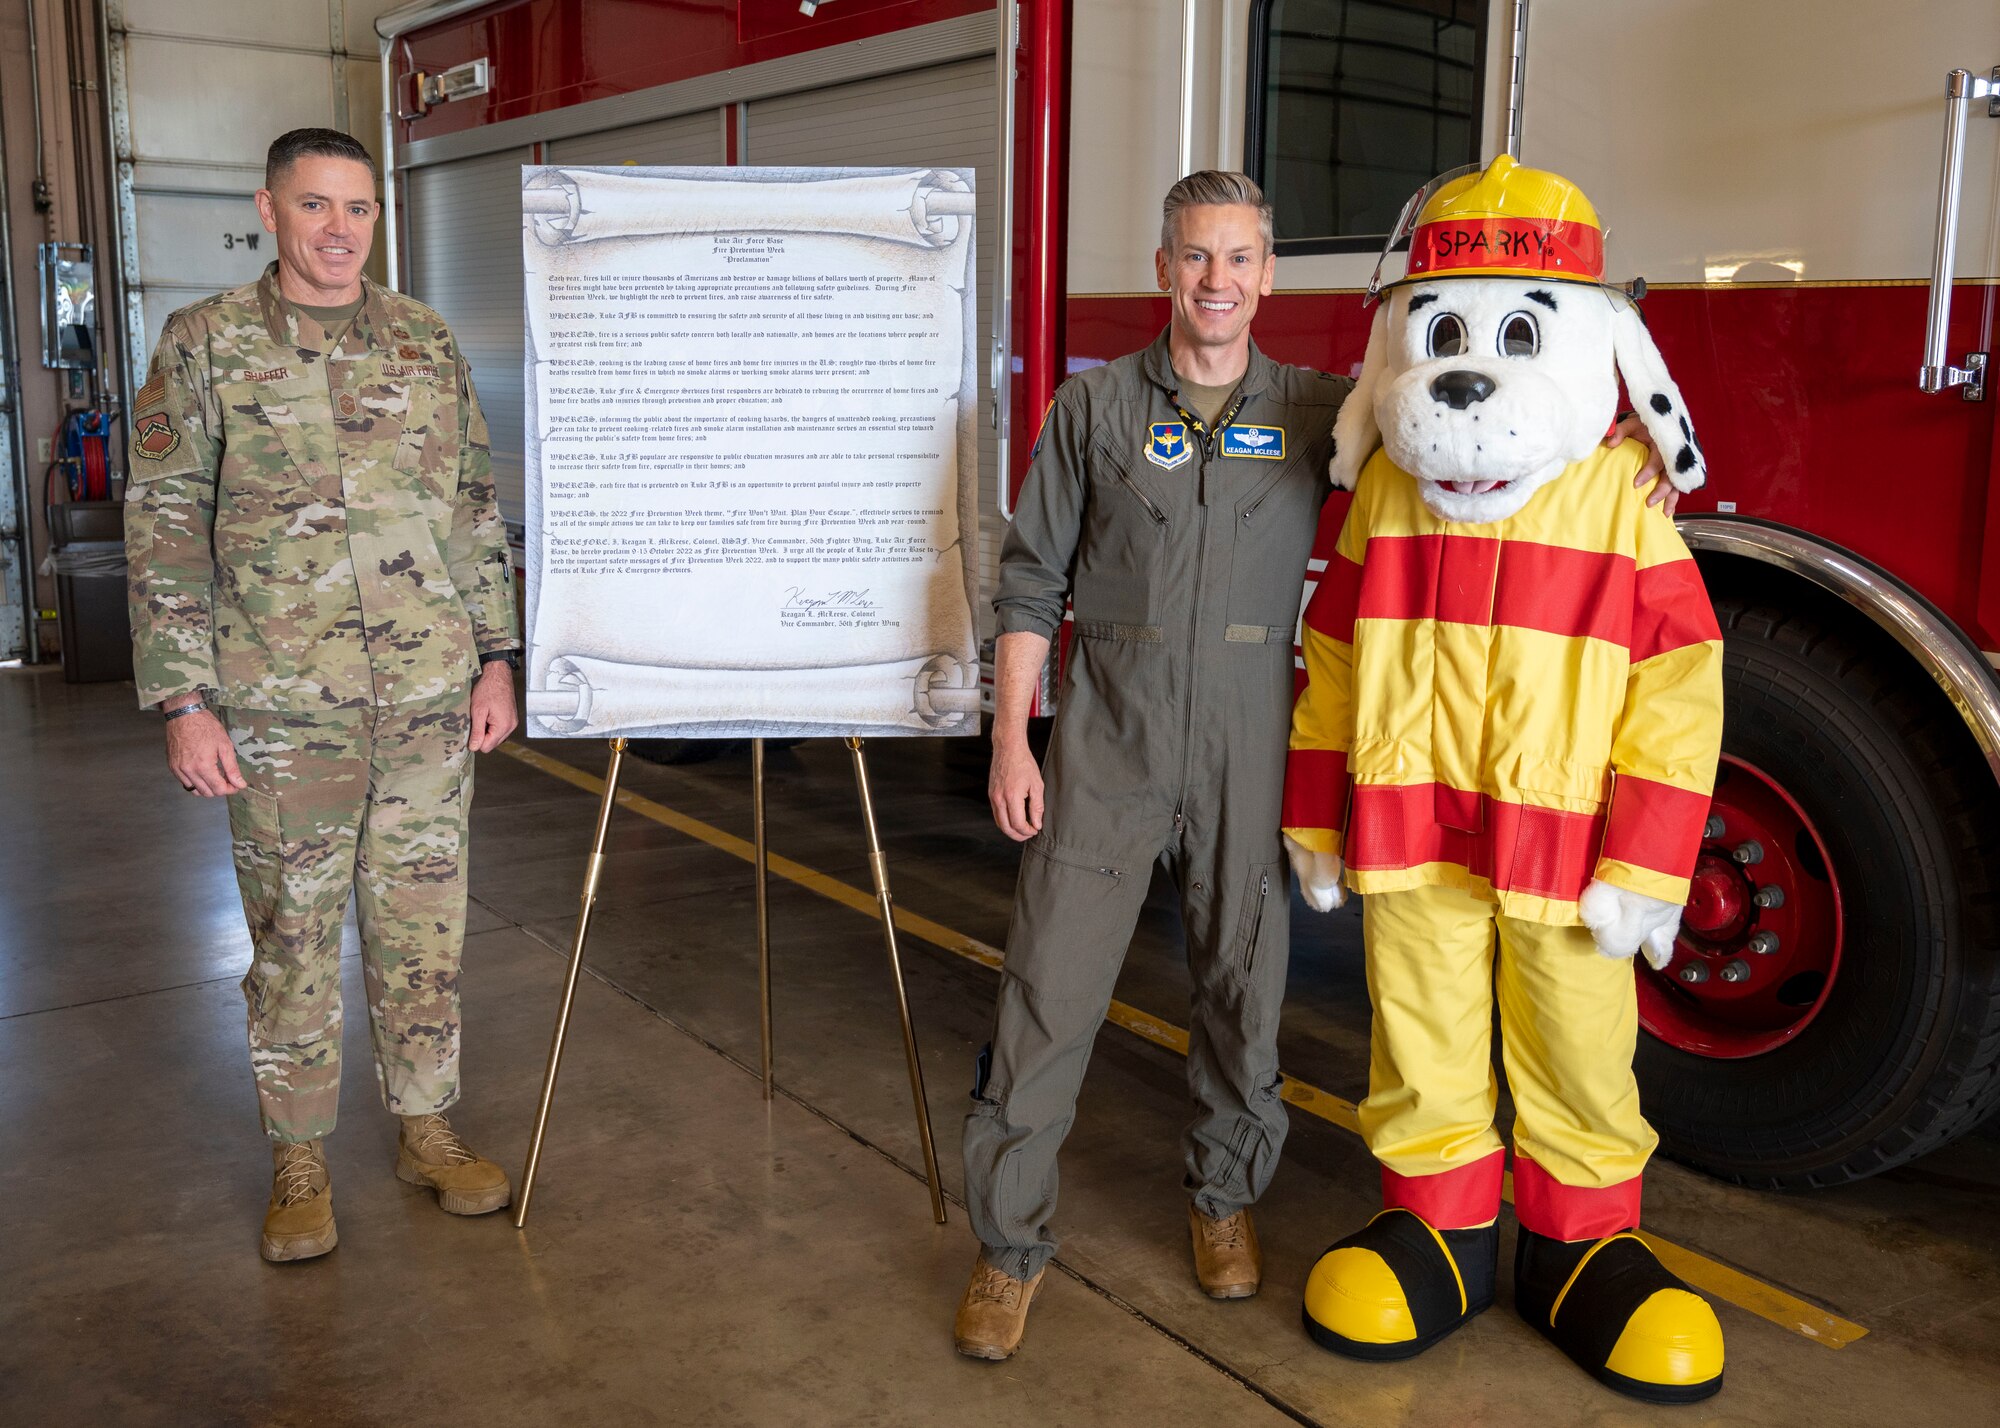 (From left to right) U.S. Air Force CMSgt. Jason Shaffer, 56th Fighter Wing command chief, Col. Keagan McLeese, 56th FW vice commander and 56th Civil Engineer Squadron “Sparky” kick-off this year’s Fire Prevention Week Oct. 7, 2022, at Luke Air Force Base, Arizona.